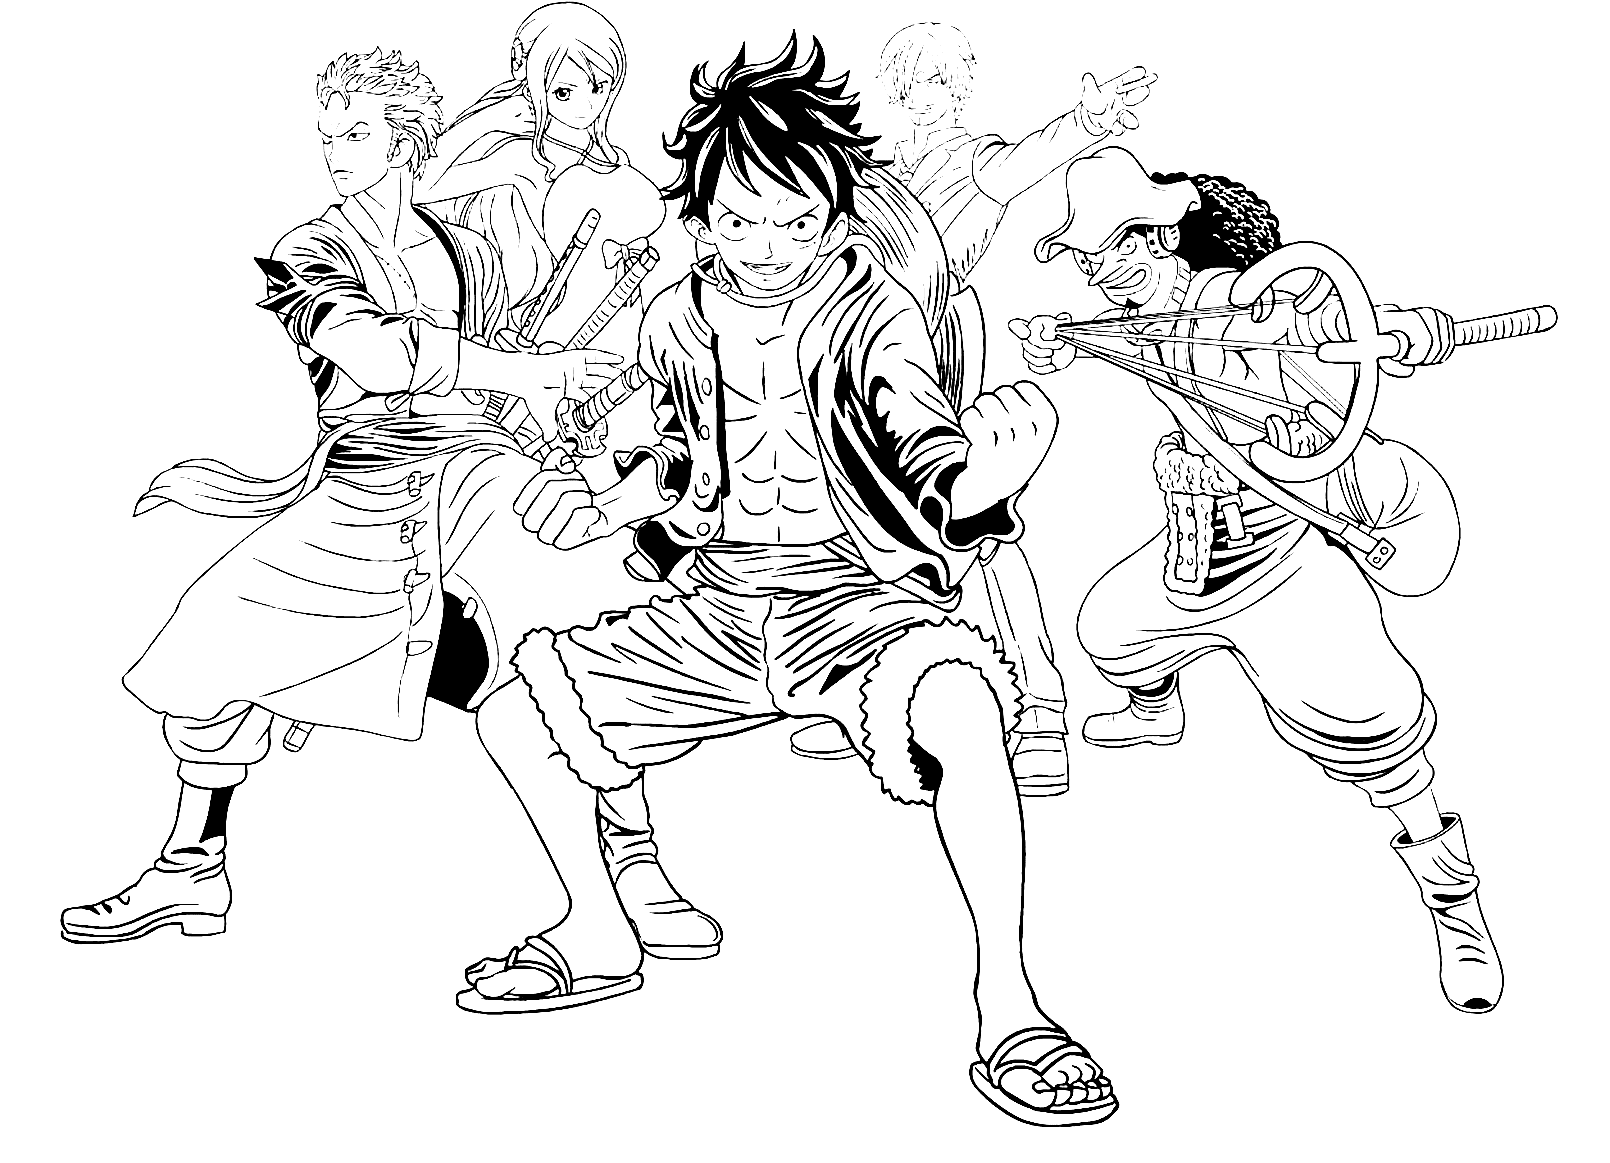 Luffy in One Piece 4 Coloring Page